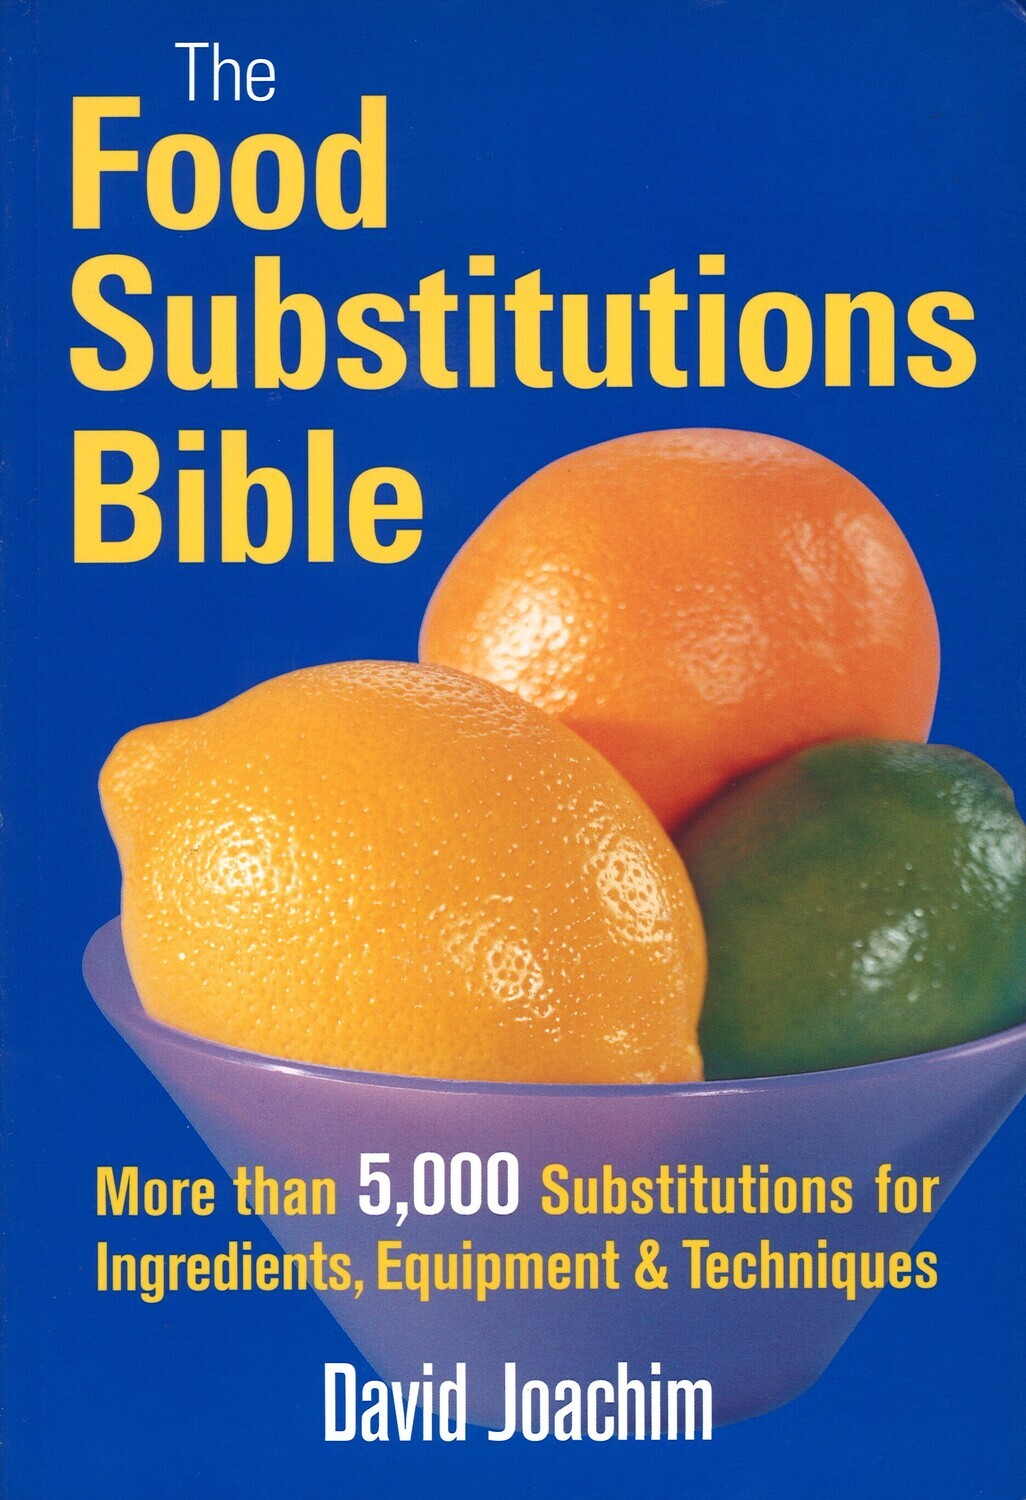 The Food Substitutions Bible